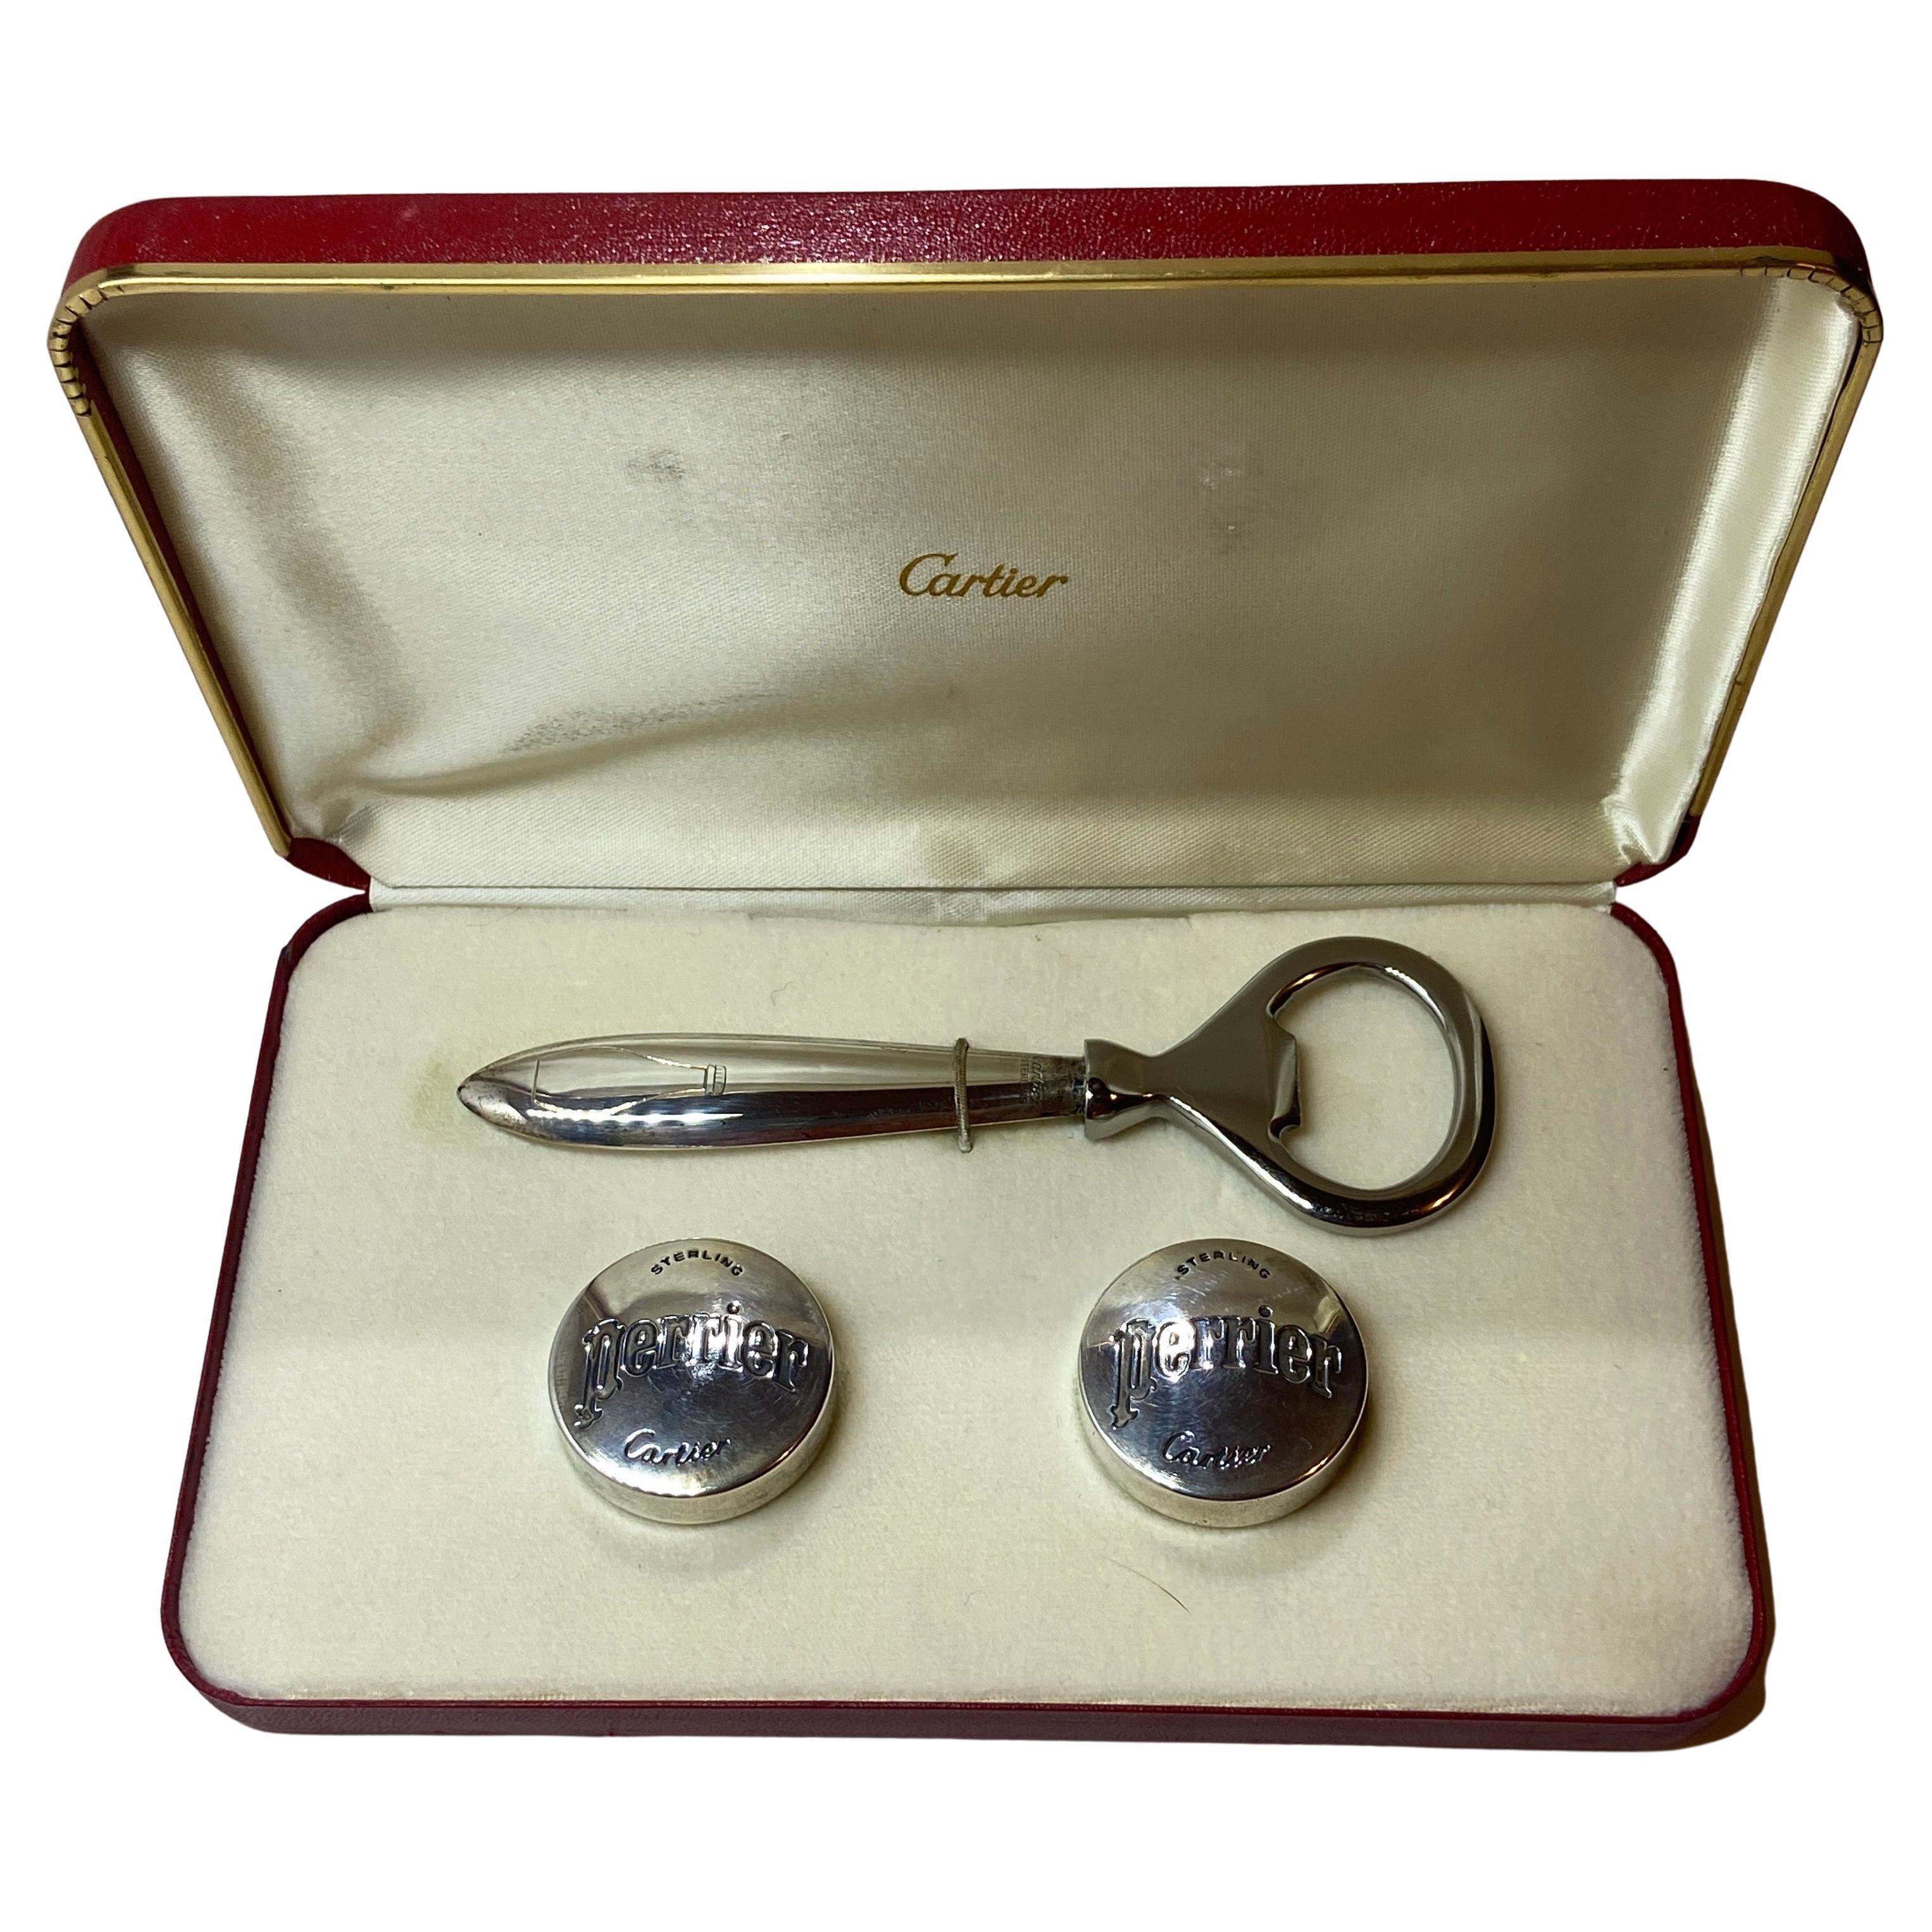 Cartier Boxed Sterling Silver Set of Perrier Bottle Caps and Bottle Opener For Sale